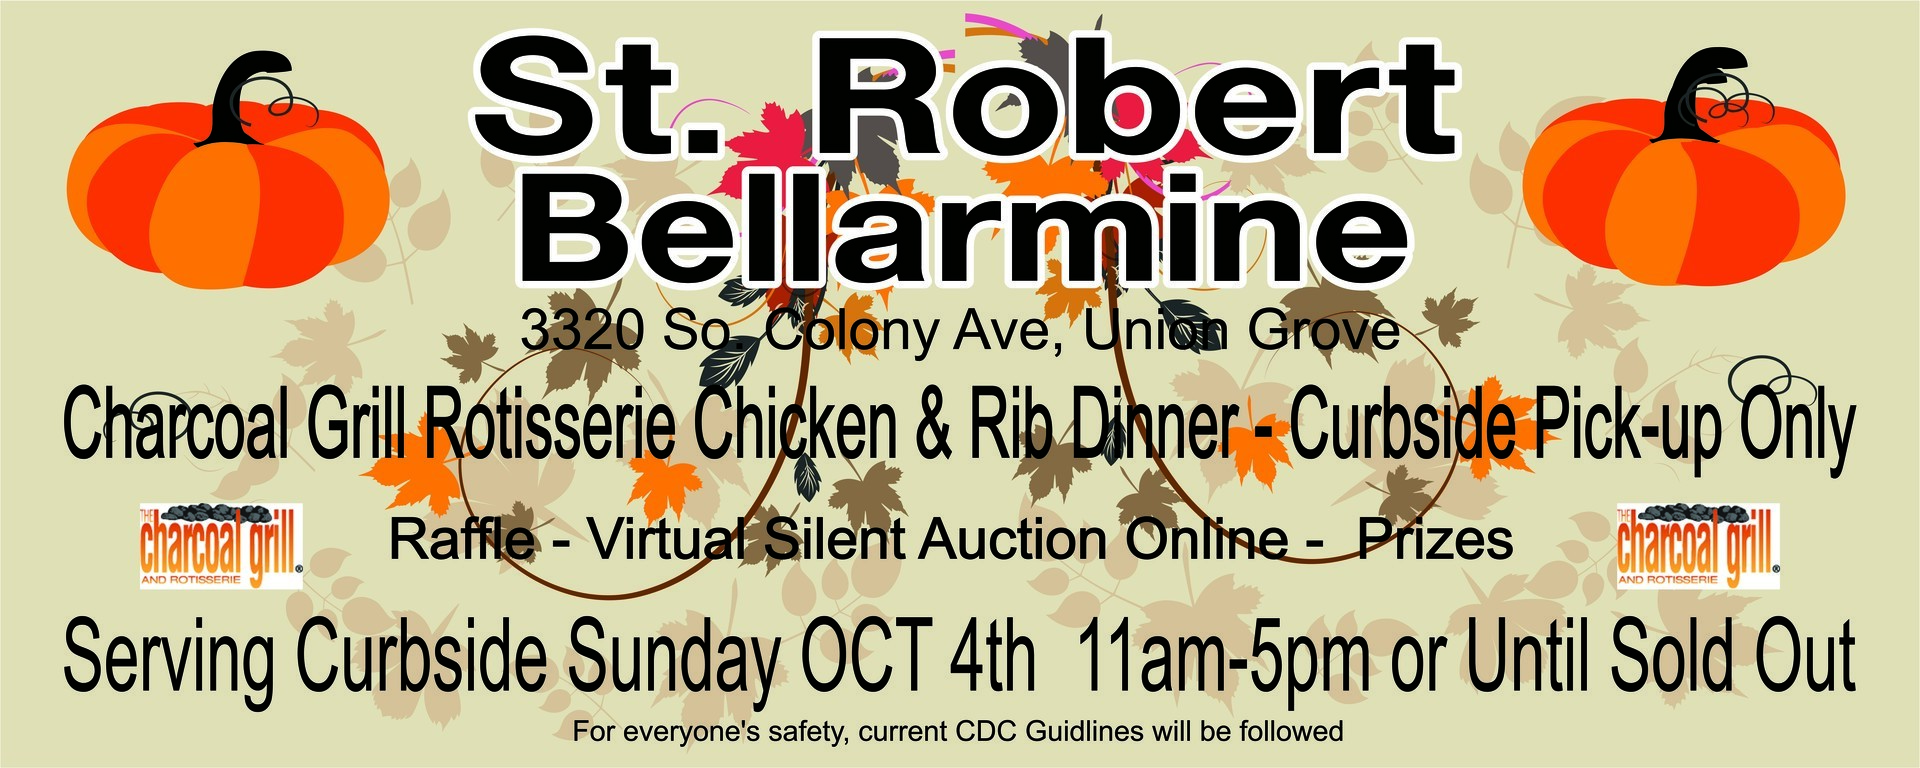 St. Robert Bellarmine Virtual Fall Festival and Curbside Rotisserie Chicken and BBQ Dinner, Union Grove, Wisconsin, United States